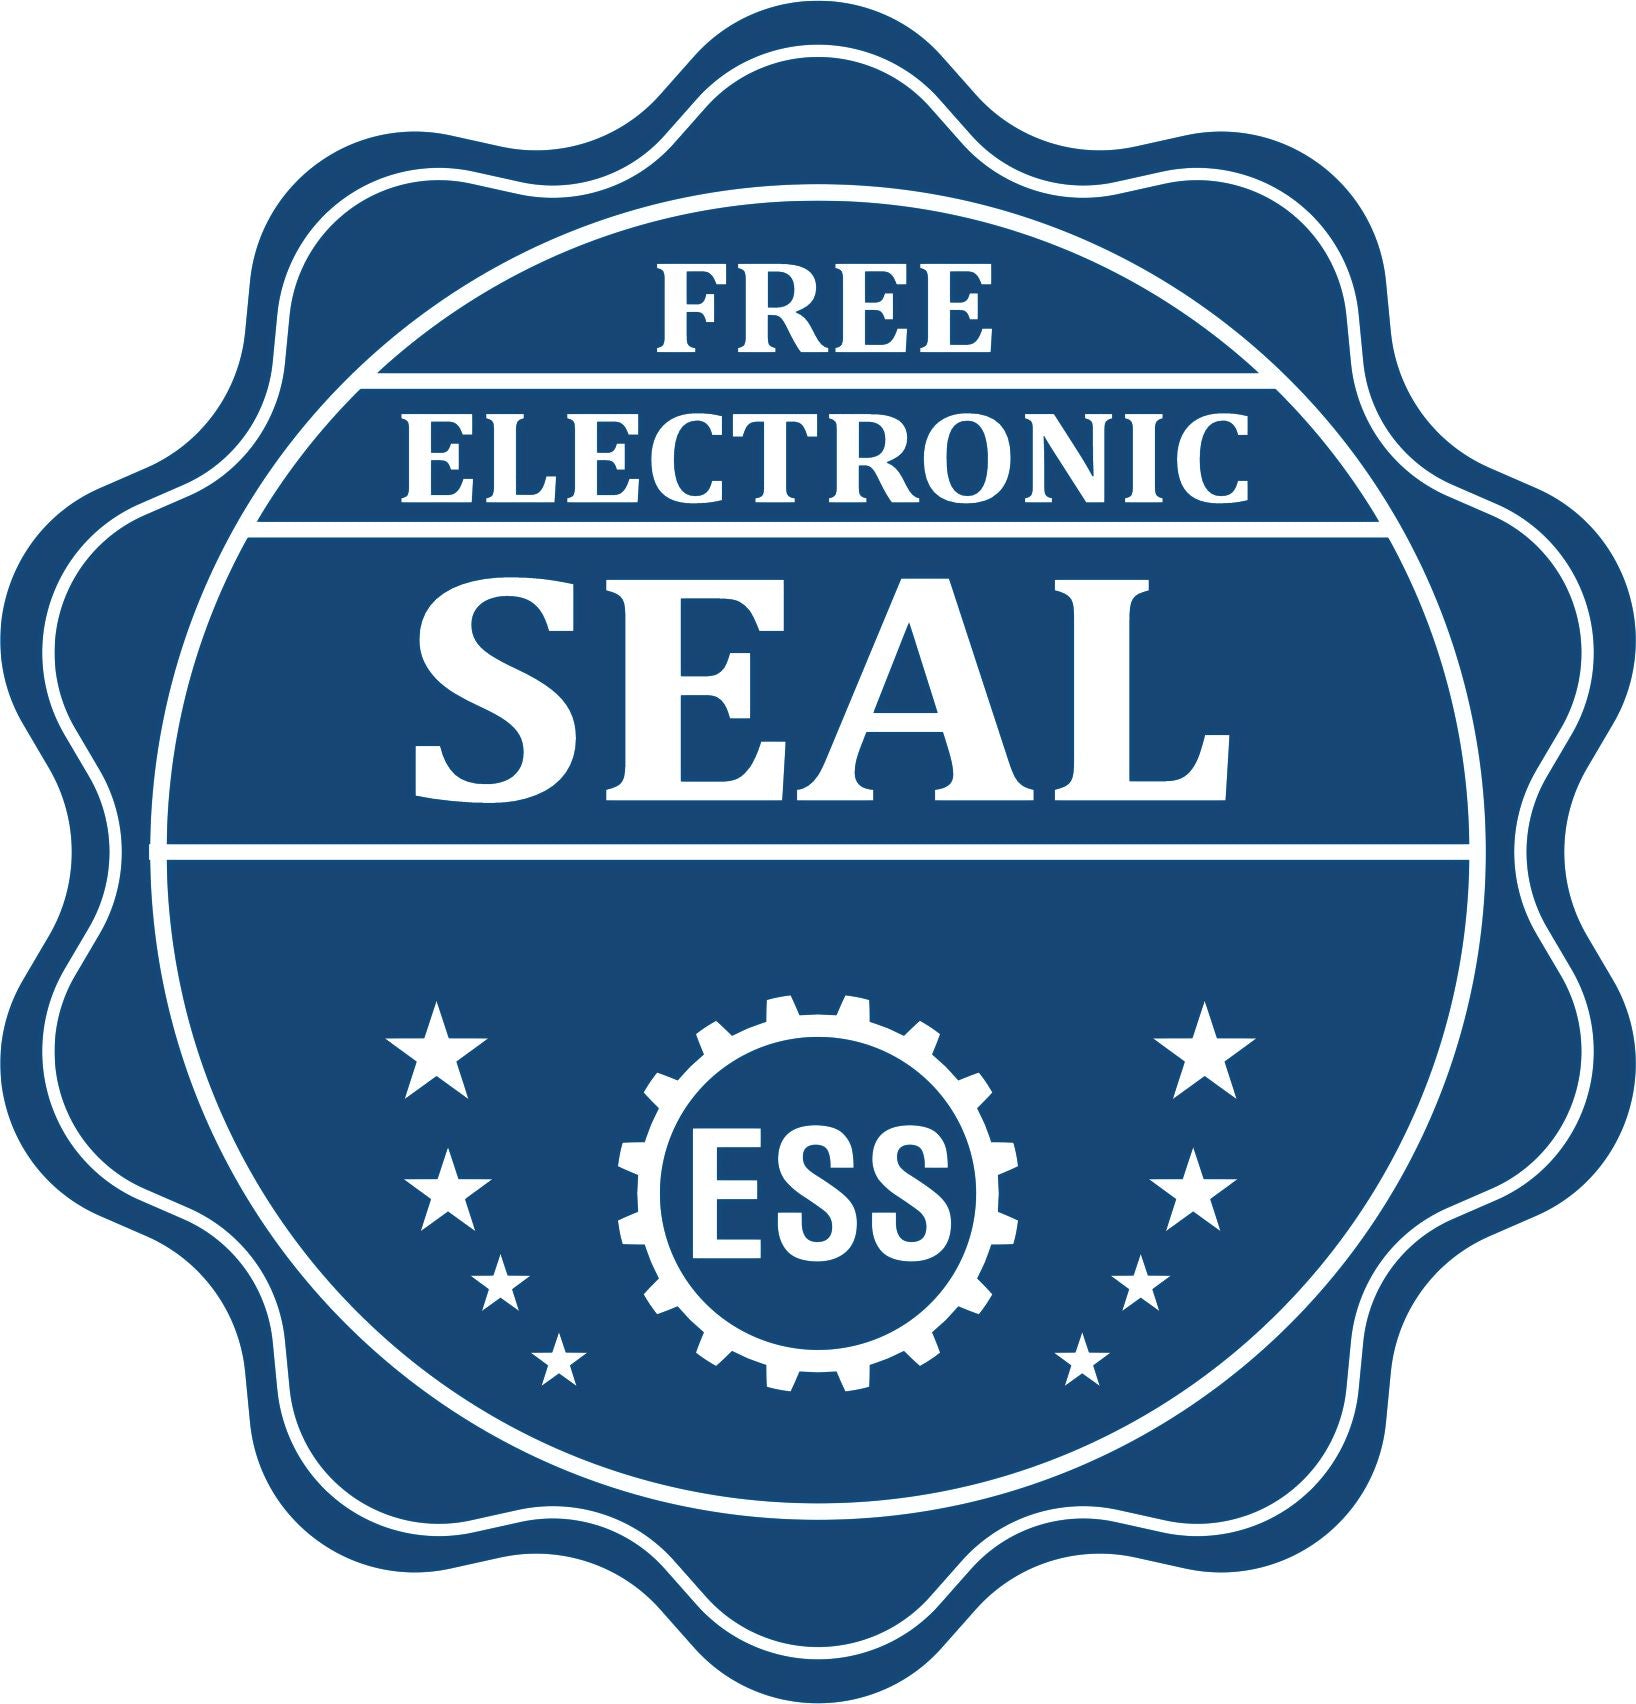 A badge showing a free electronic seal for the Long Reach Connecticut PE Seal with stars and the ESS gear on the emblem.